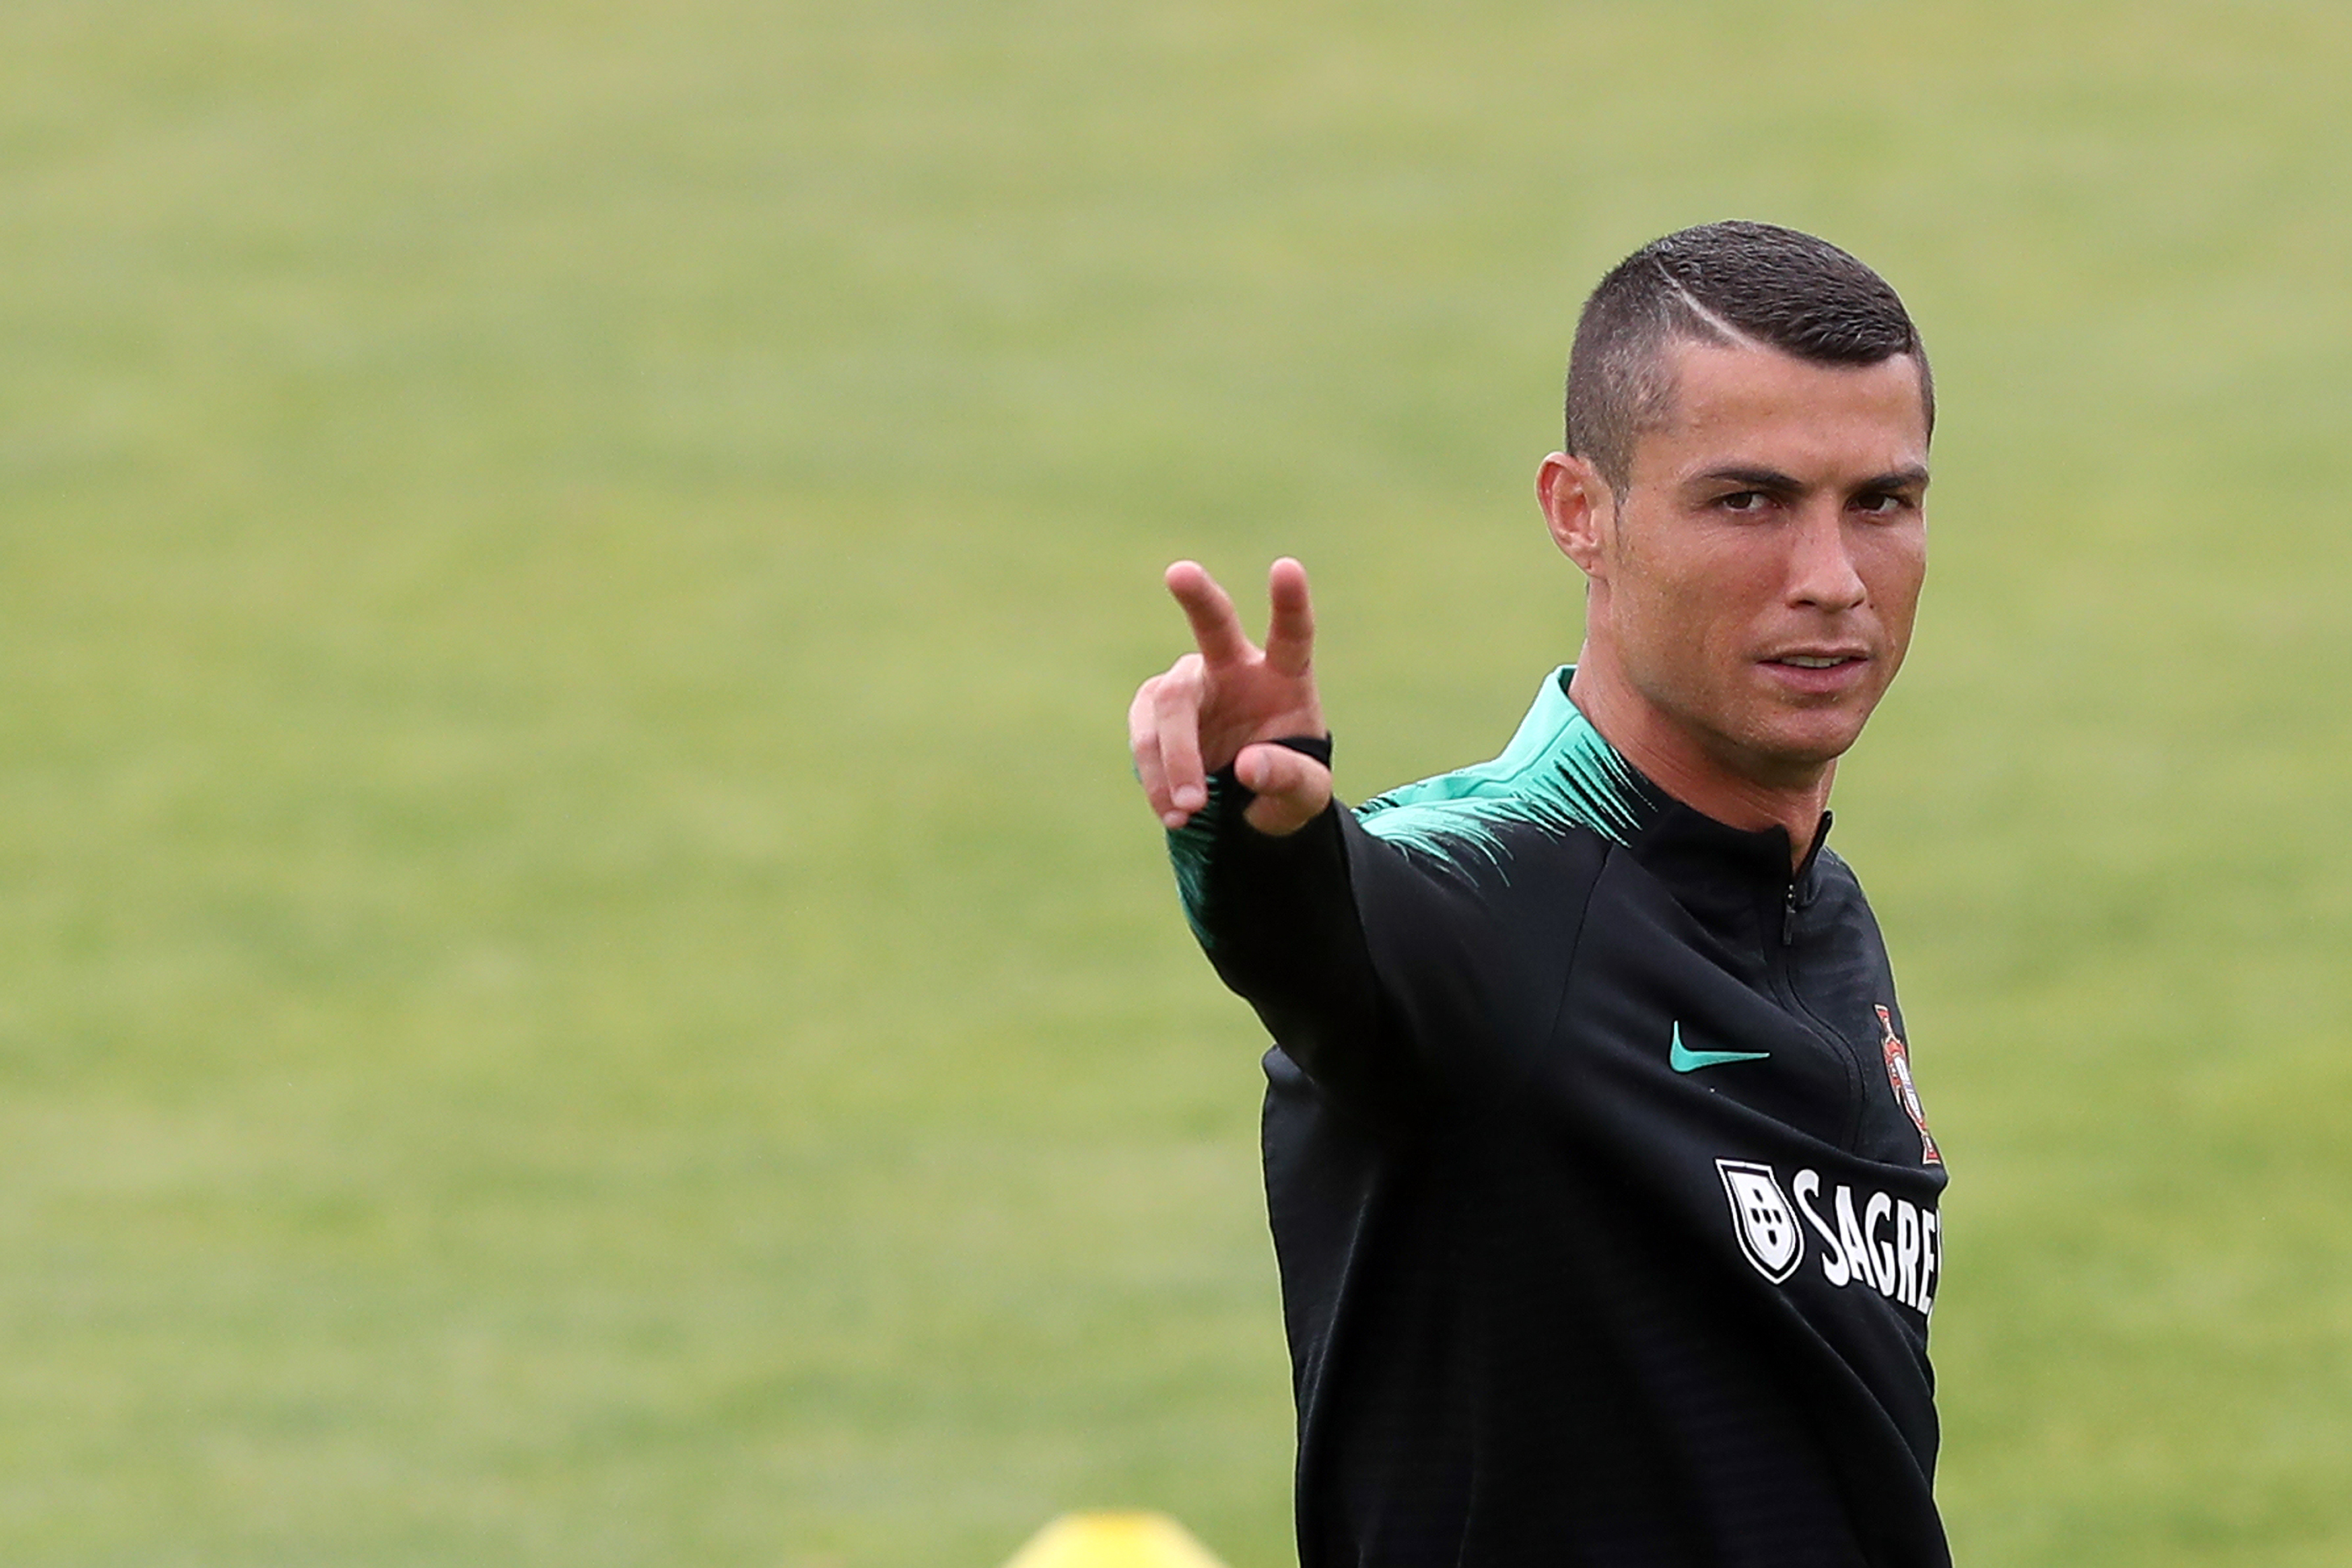 Cristiano Ronaldo Was Just Dethroned as the World's Highest-Paid Athlete